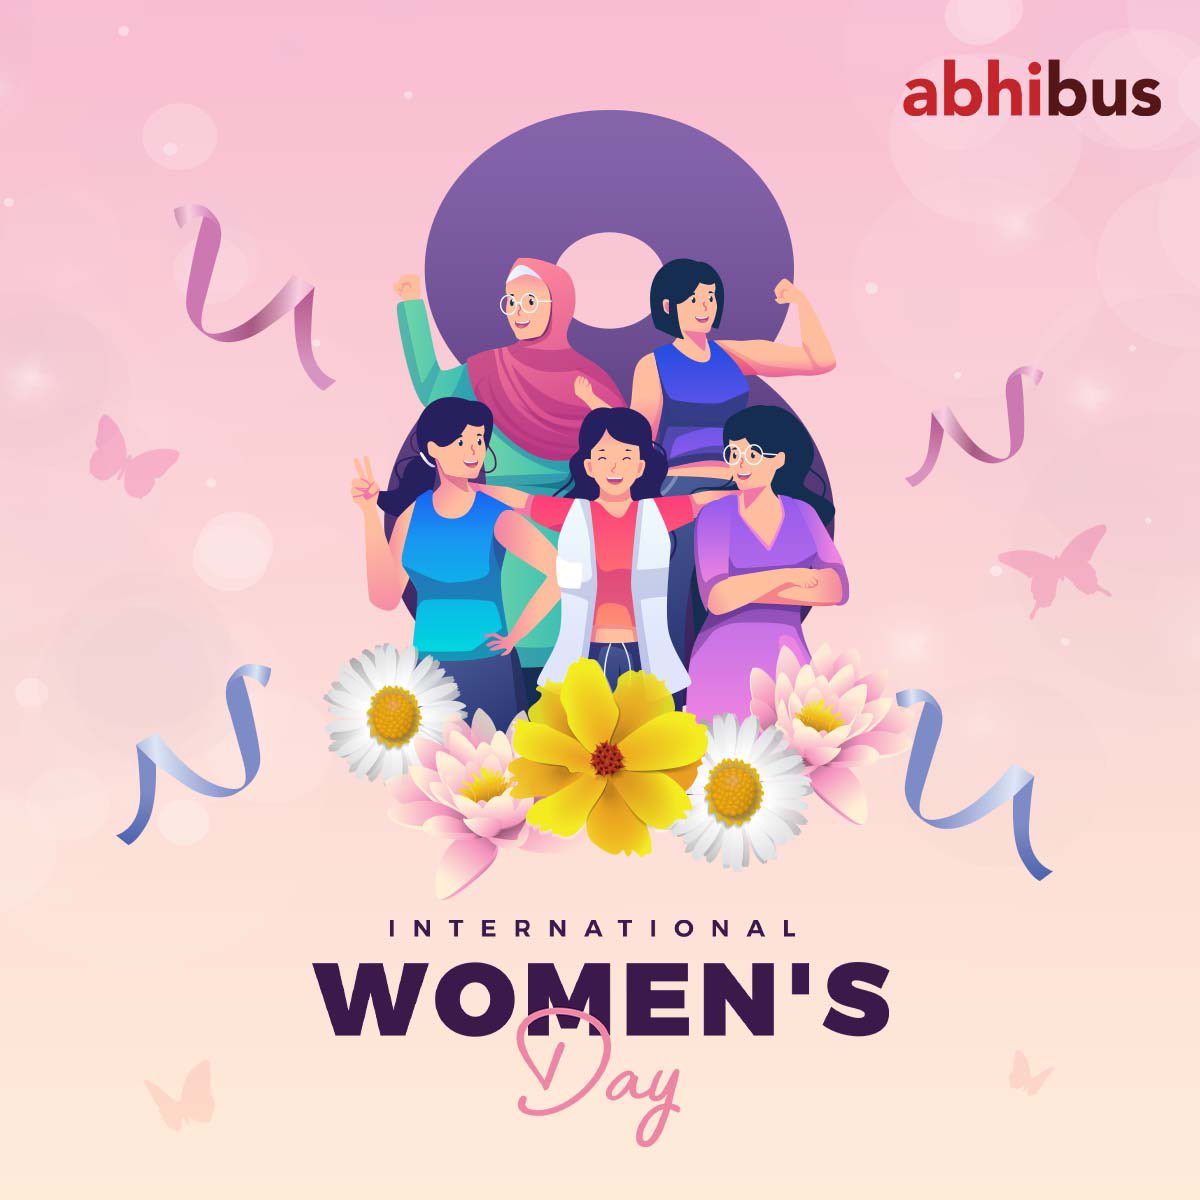 Happy Women’s day to all the women out there!!💜 #WomensDay #WomensDay24